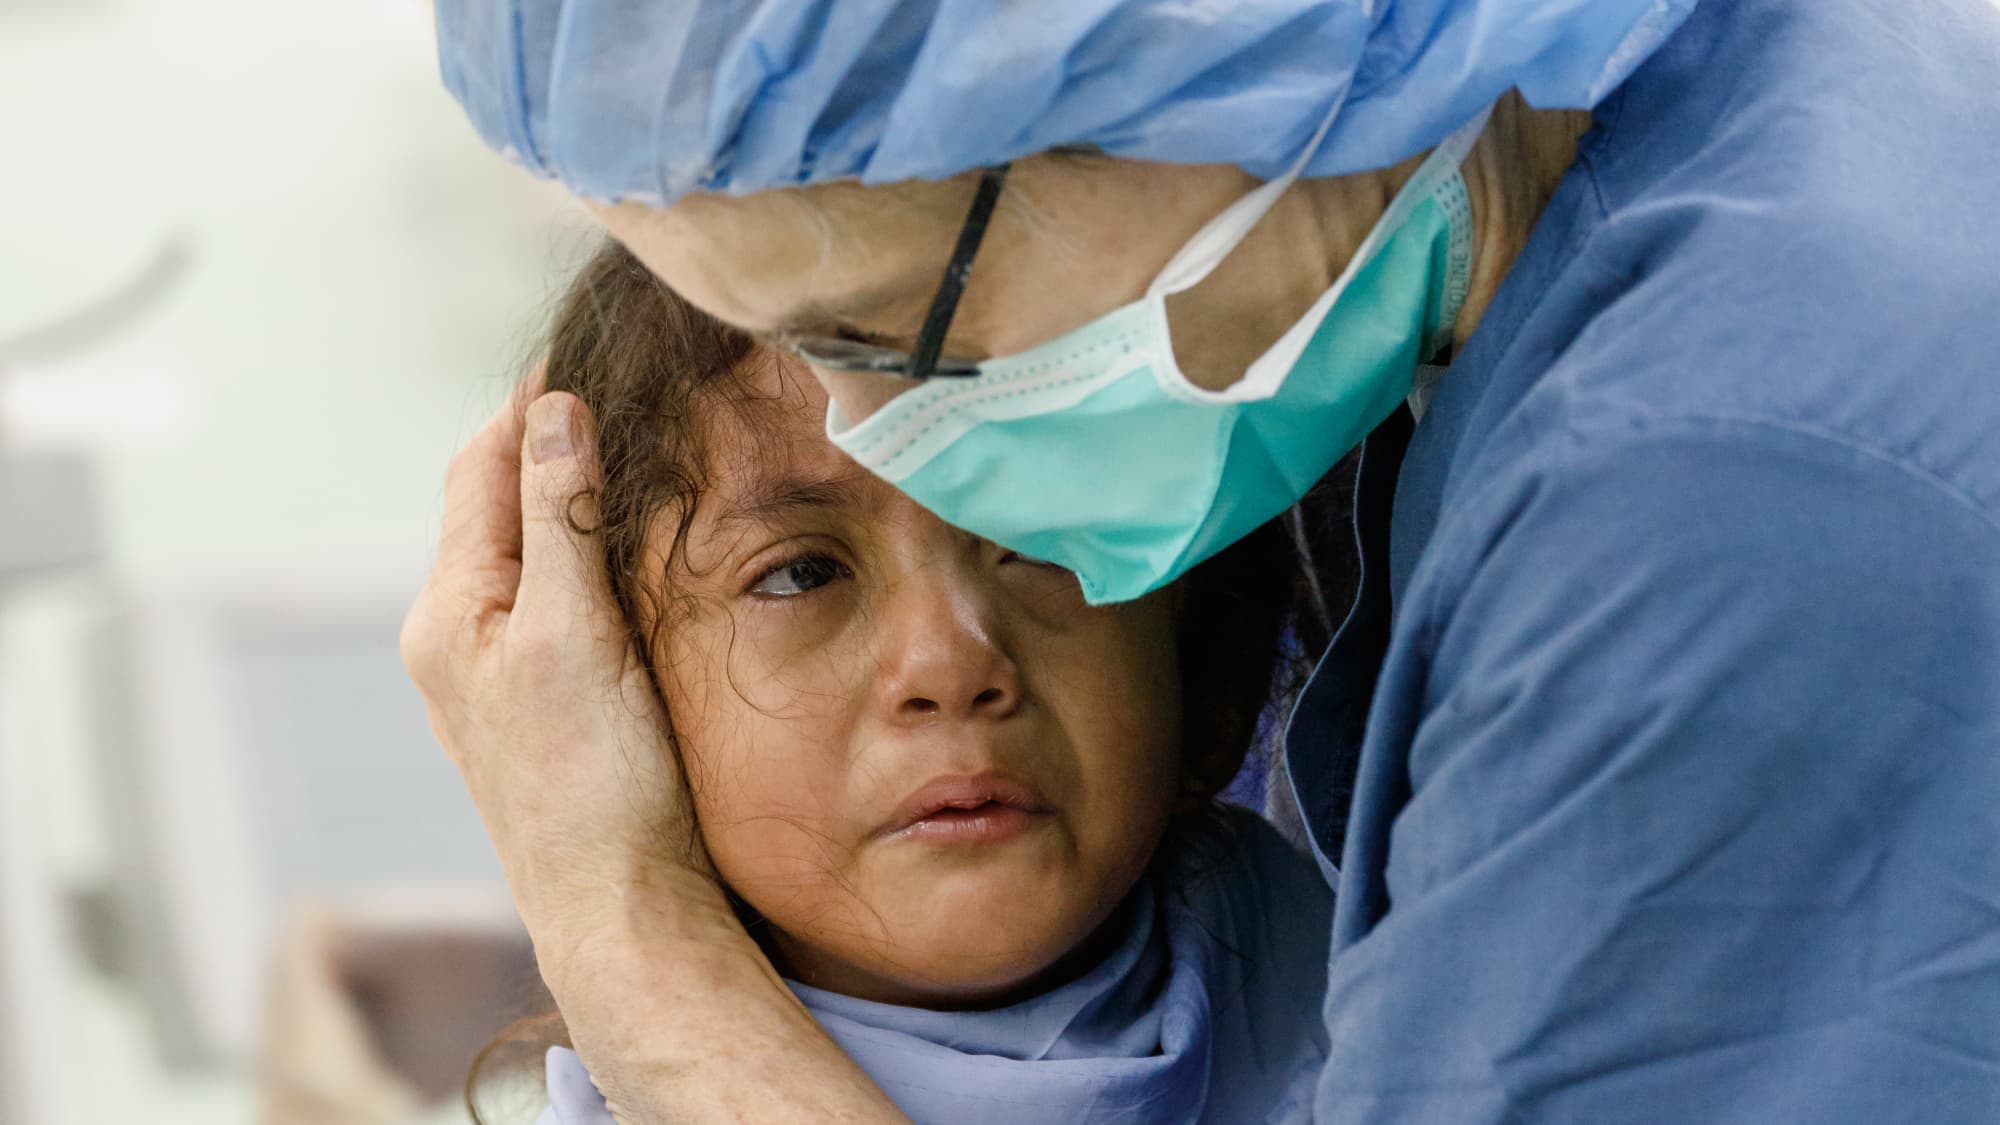 a nurse comforts a crying child.